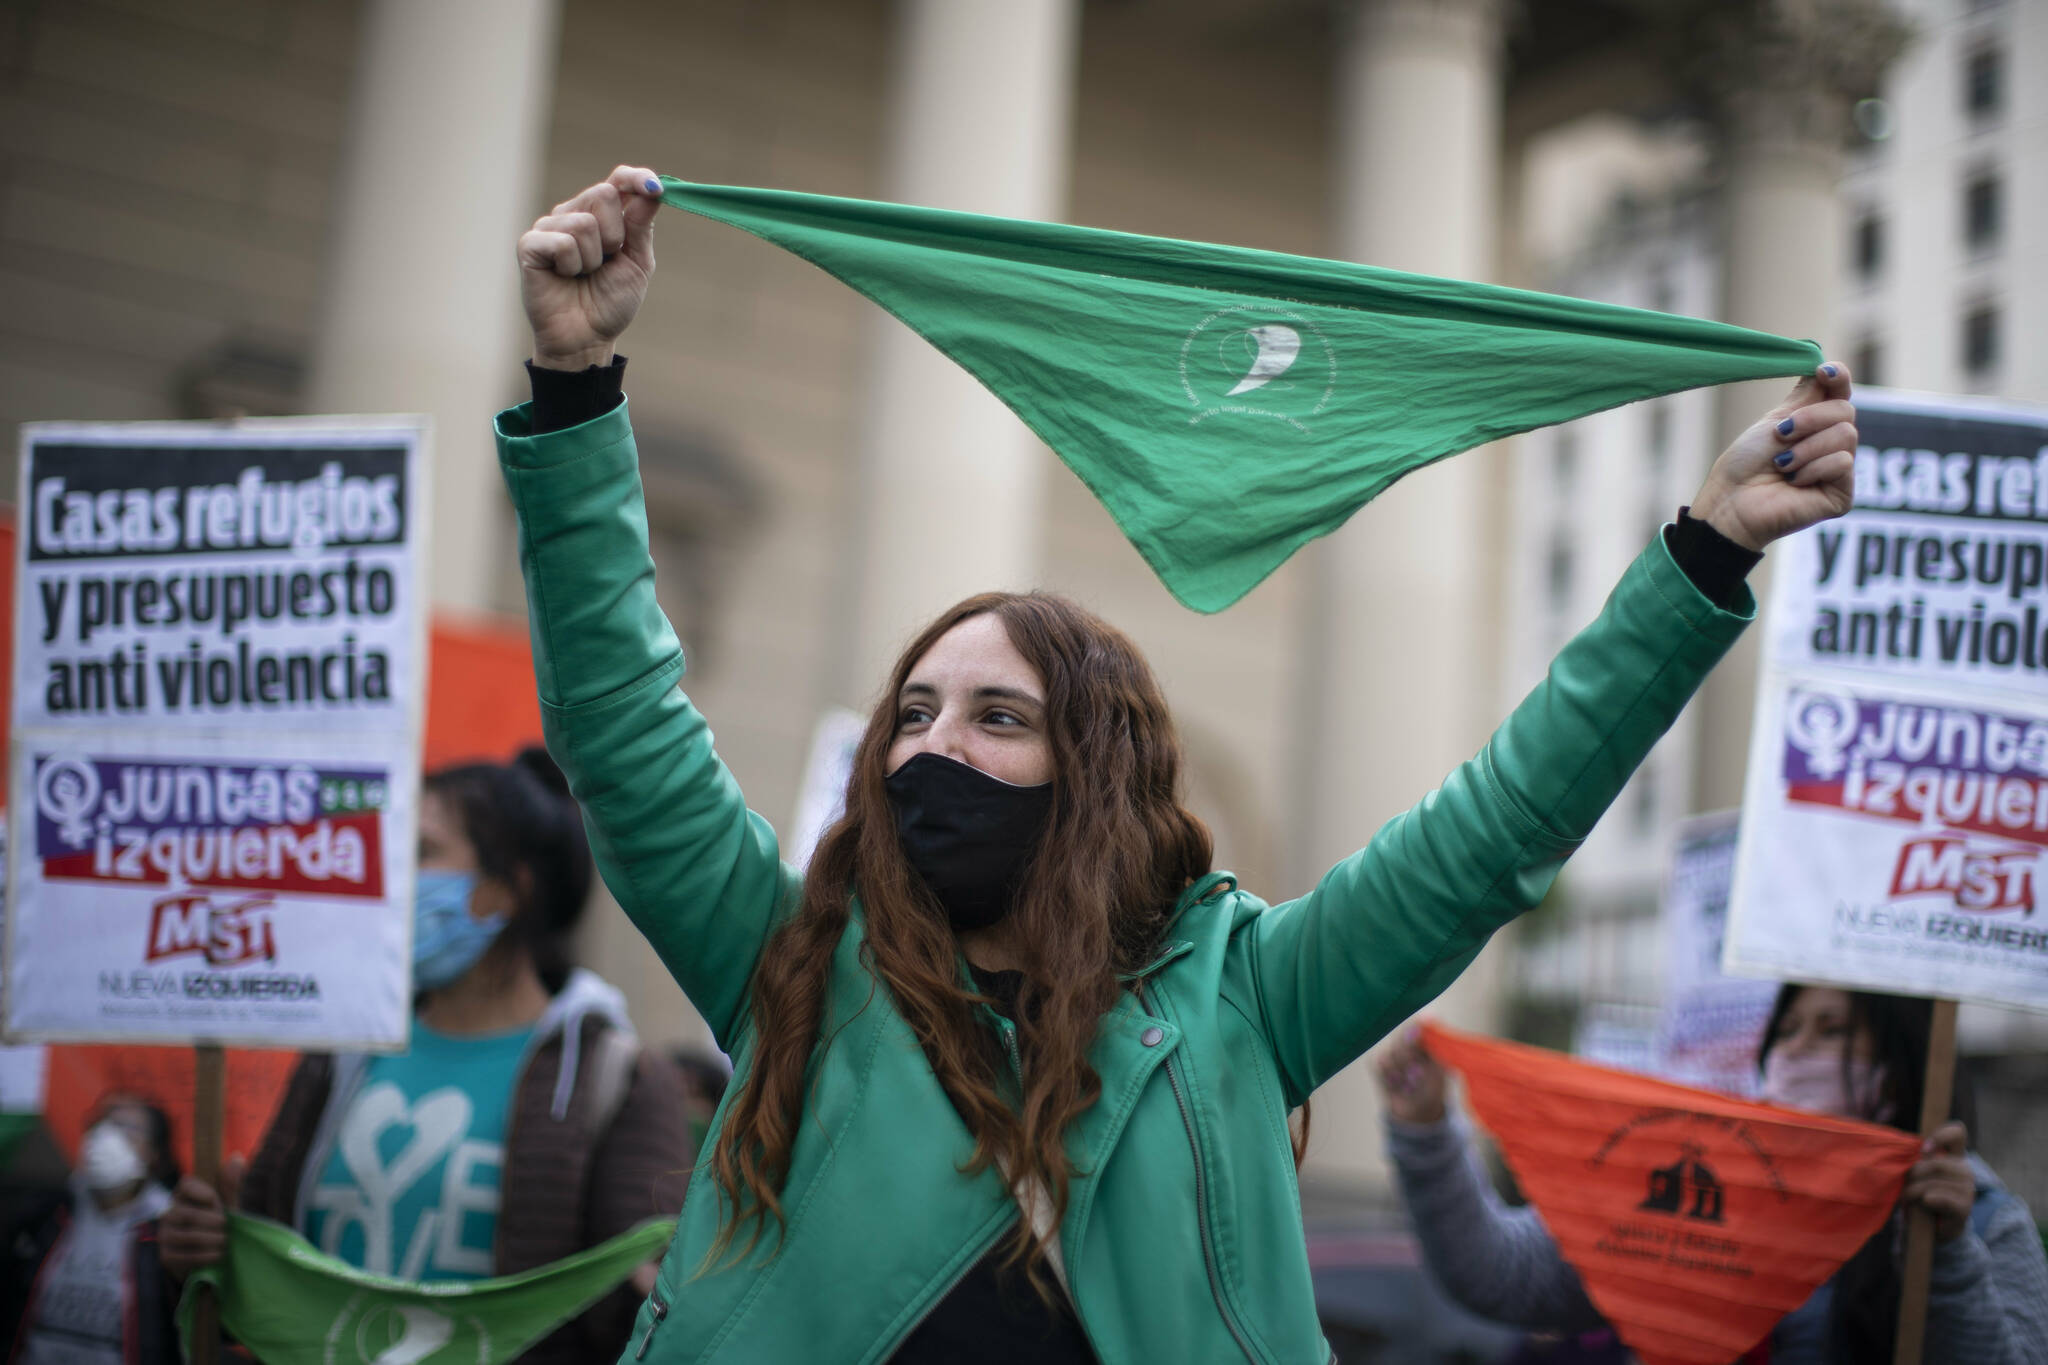 A woman holds a pro-abortion green handkerchief during a protest against gender violence in Buenos Aires, Argentina, on Wednesday, June 3, 2020. The movement “Ni una menos,” or Not One Less marked it’s fifth year anniversary with a protest in Plaza de Mayo during the mandatory COVID-19 lockdown, to demand a stop to femicides, the legalization of abortion, workplace equality, and more budget to protect victims, among other demands. (AP Photo/Victor R. Caivano)